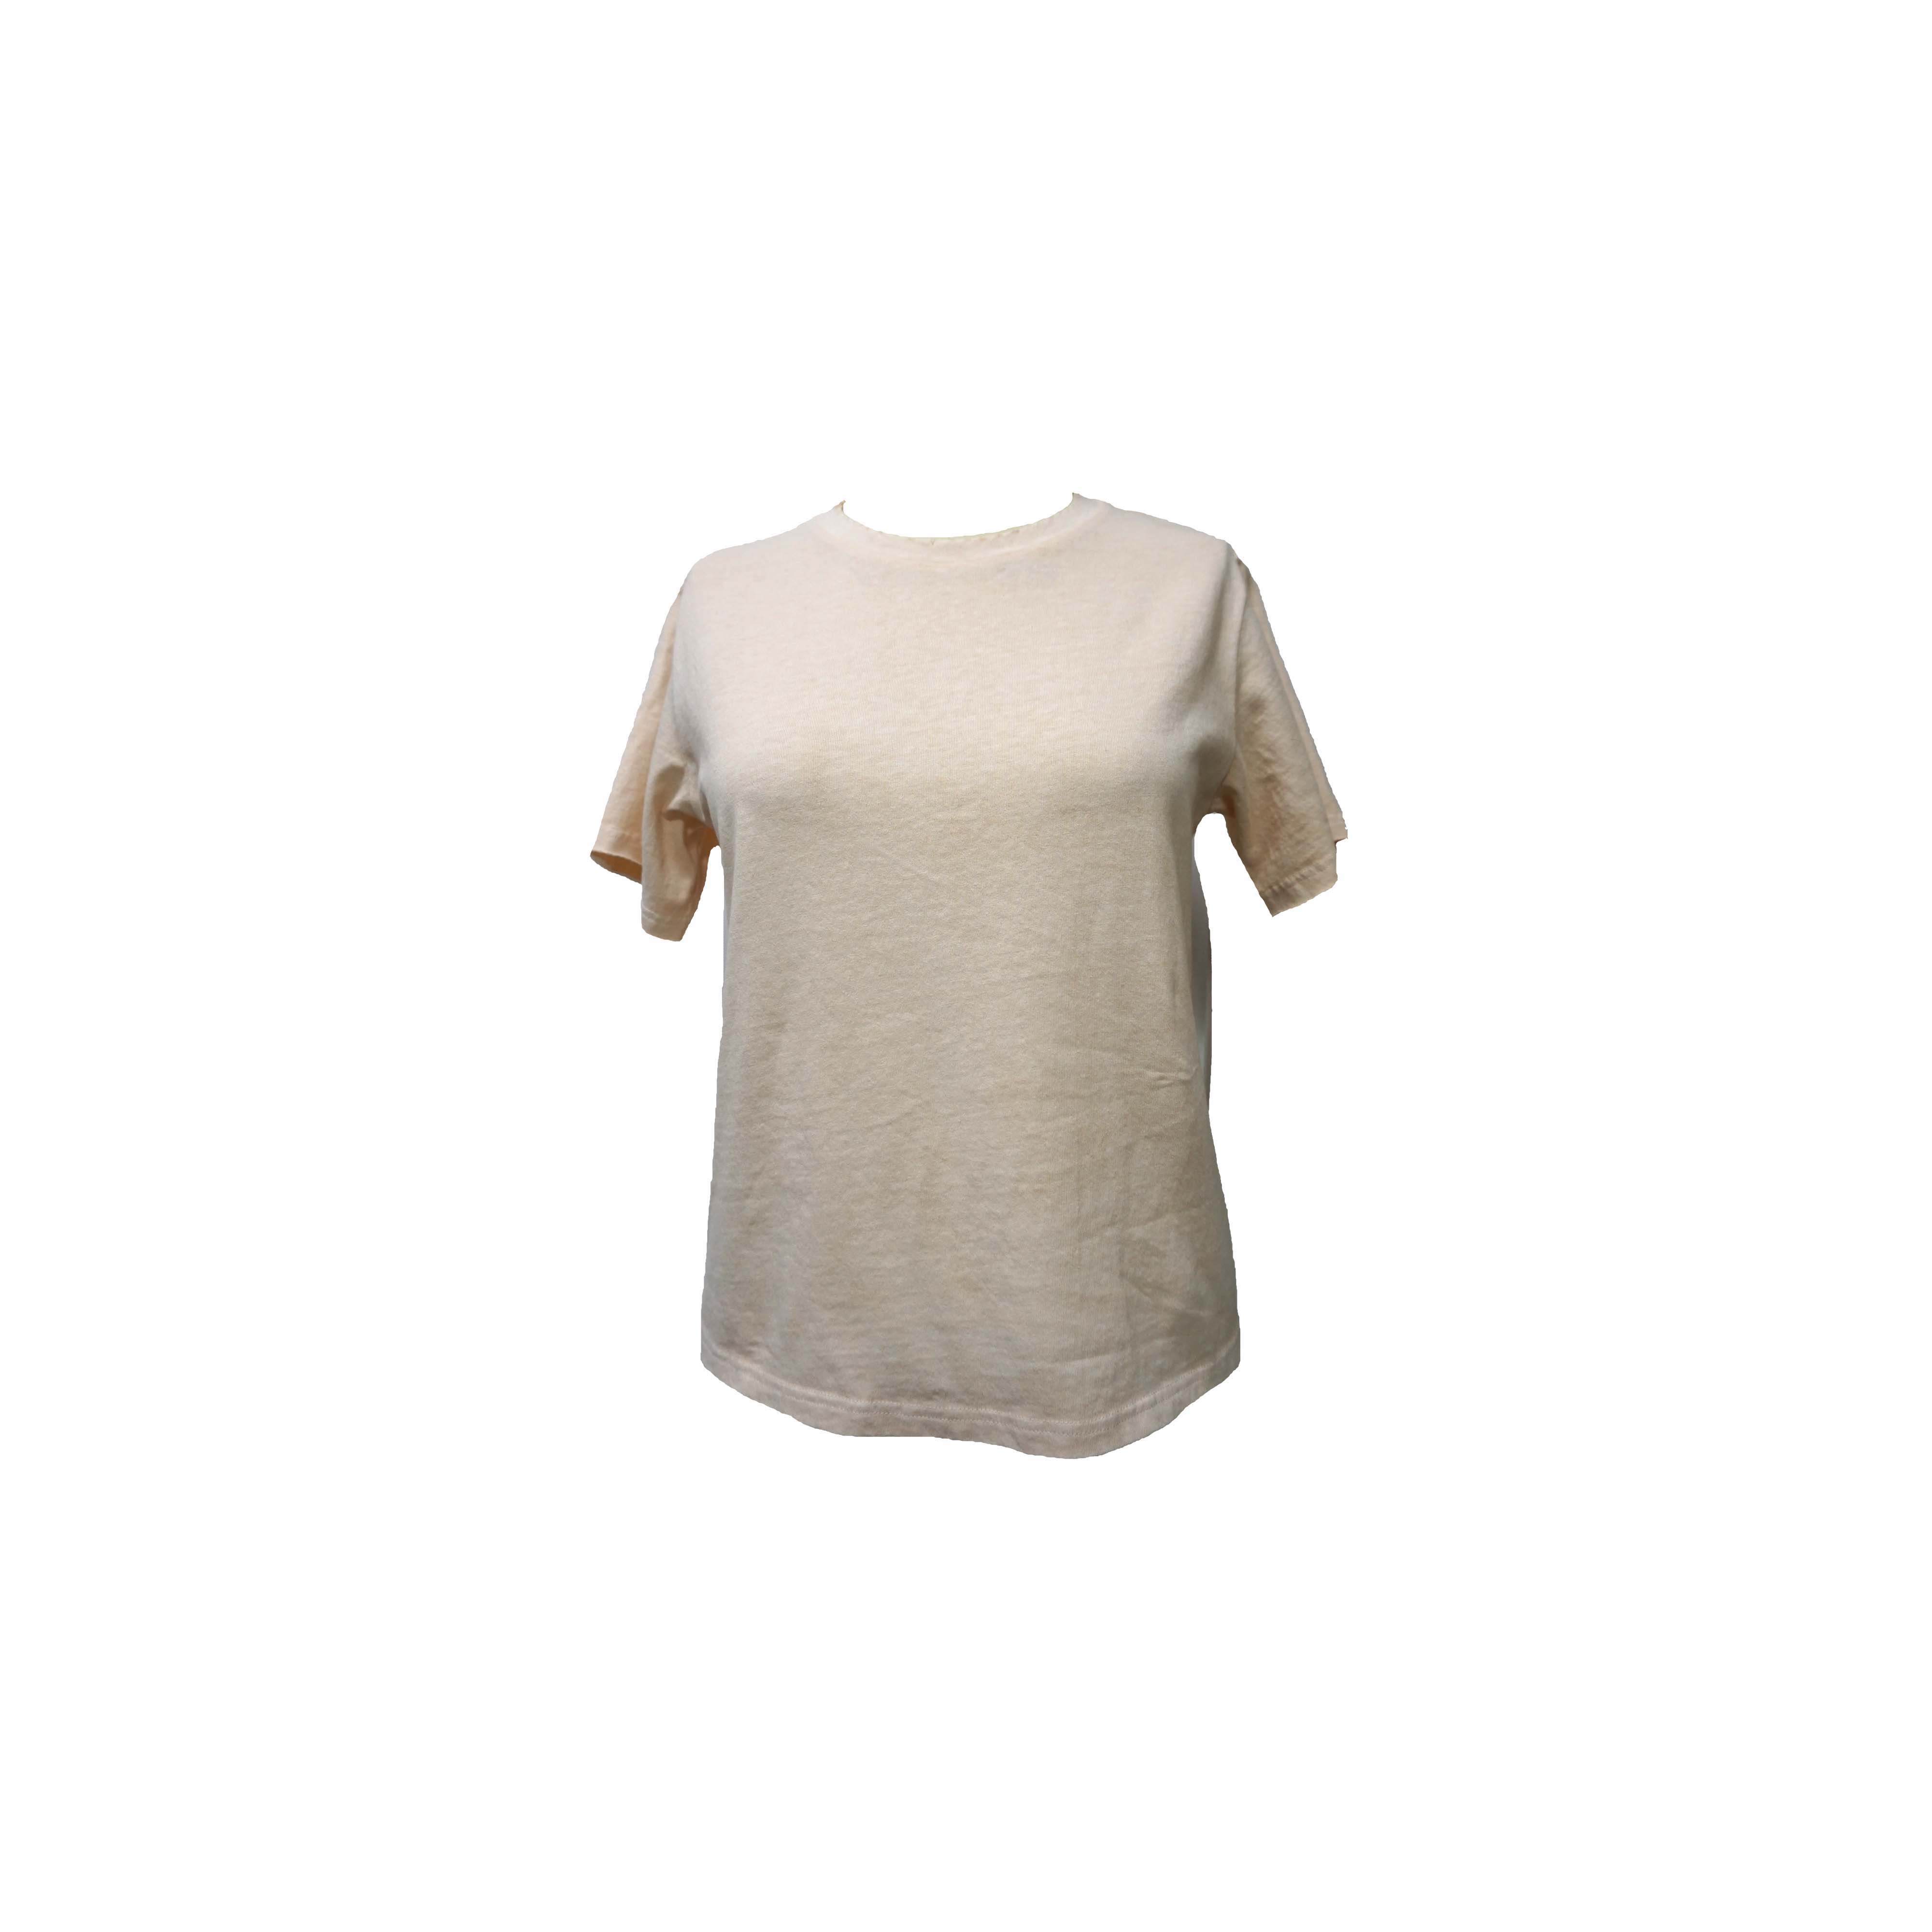 Cotton simple printed t-shirt